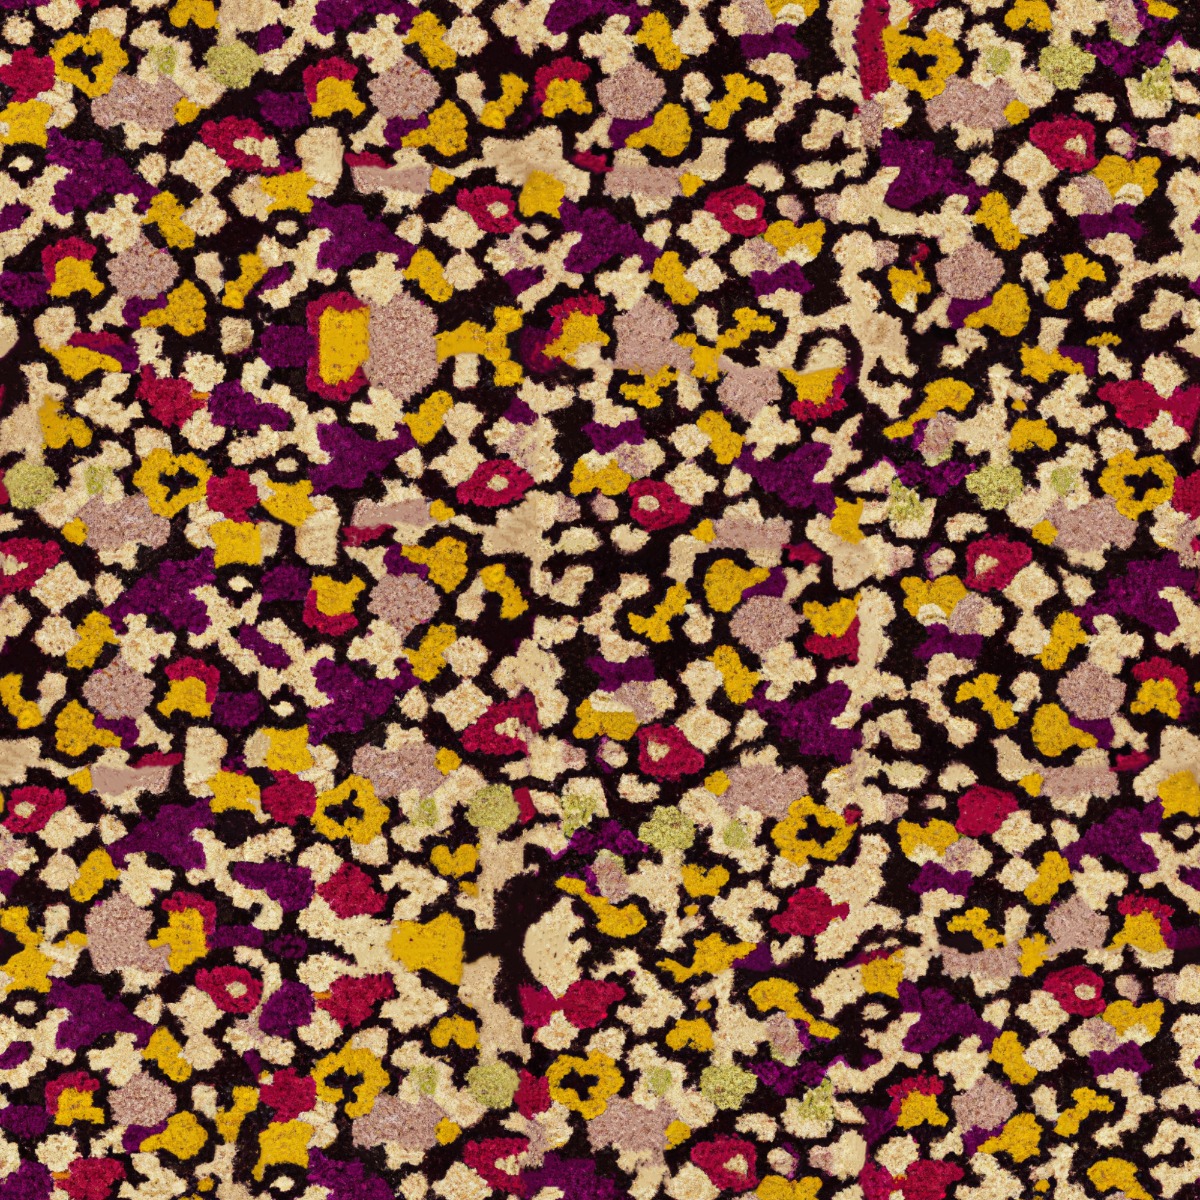 A seamless carpet texture with las vegas carpet units arranged in a None pattern